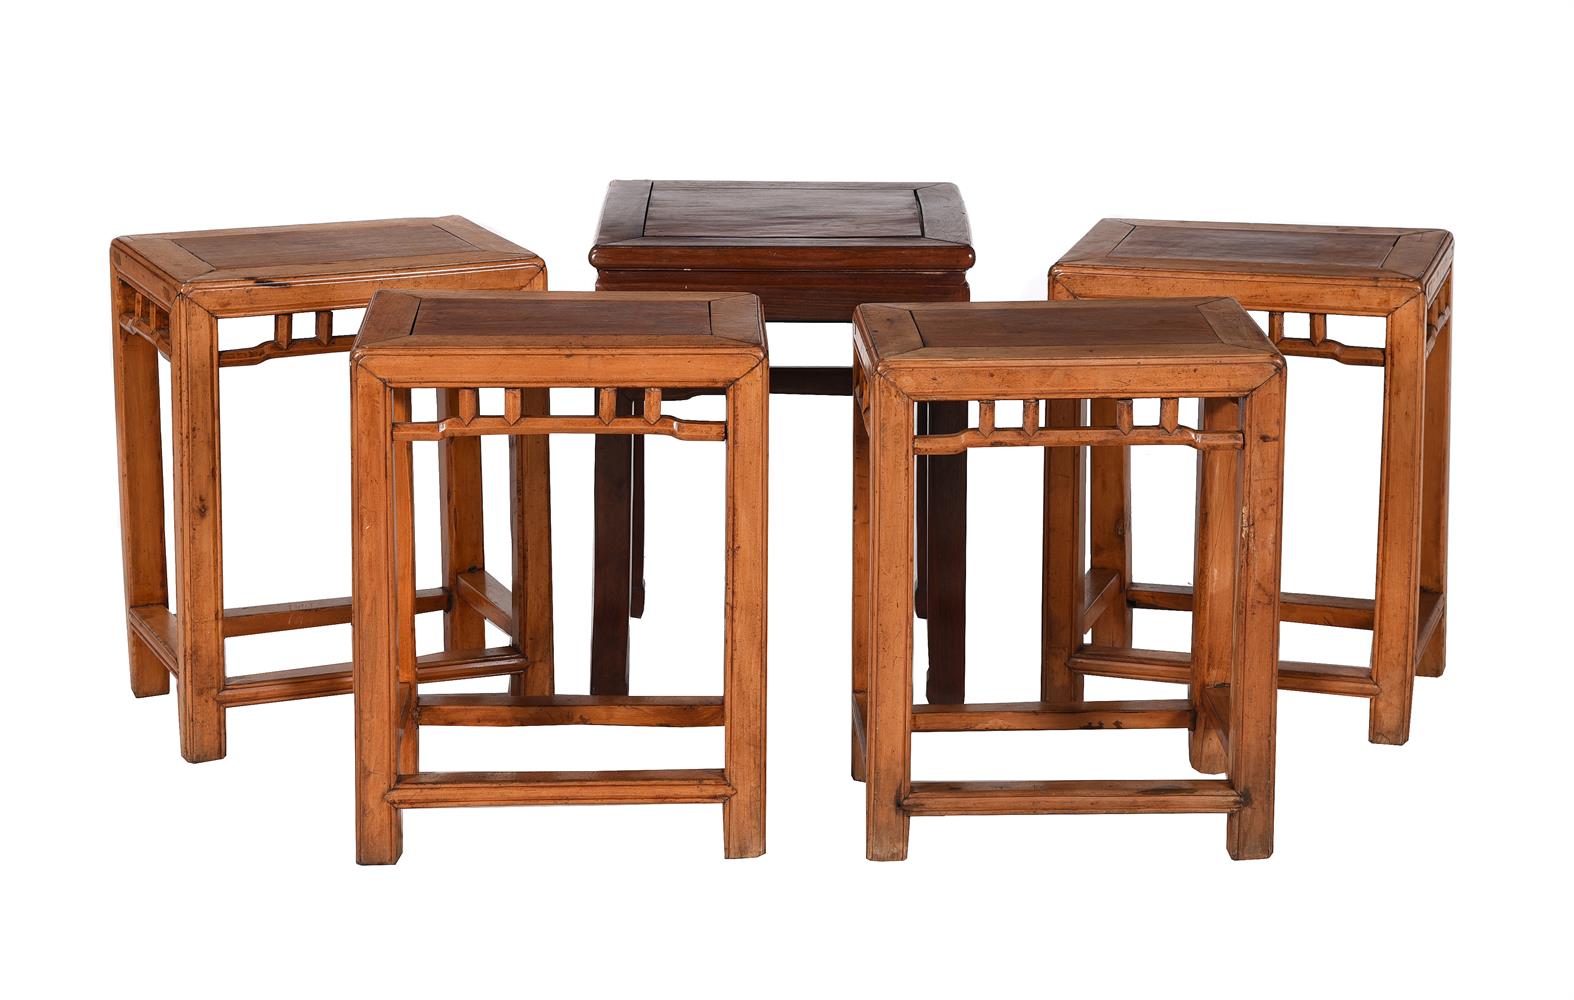 FOUR SIMILAR CHINESE EXOTIC HARDWOOD STOOLS OR LOW TABLES